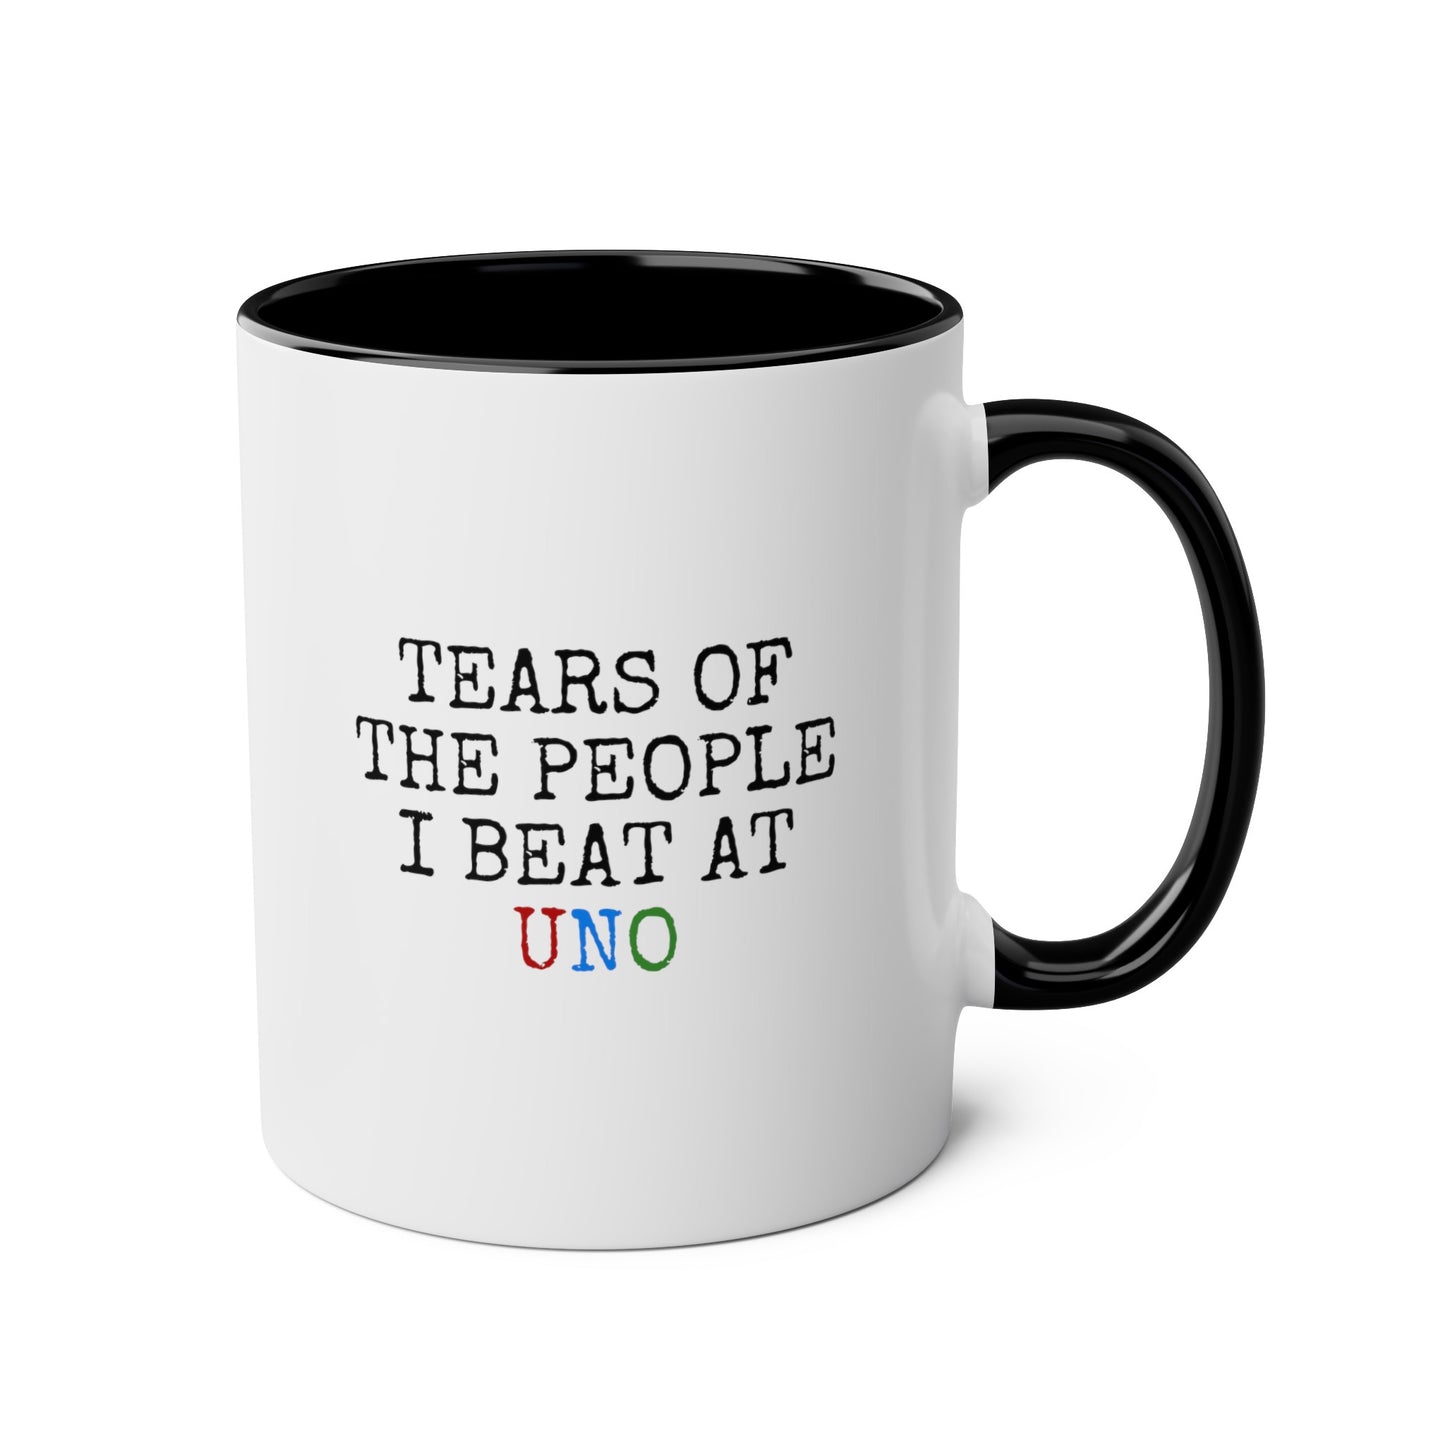 Tears Of The People I Beat At Uno 11oz white with black accent funny large coffee mug gift for friends family game night card player waveywares wavey wares wavywares wavy wares